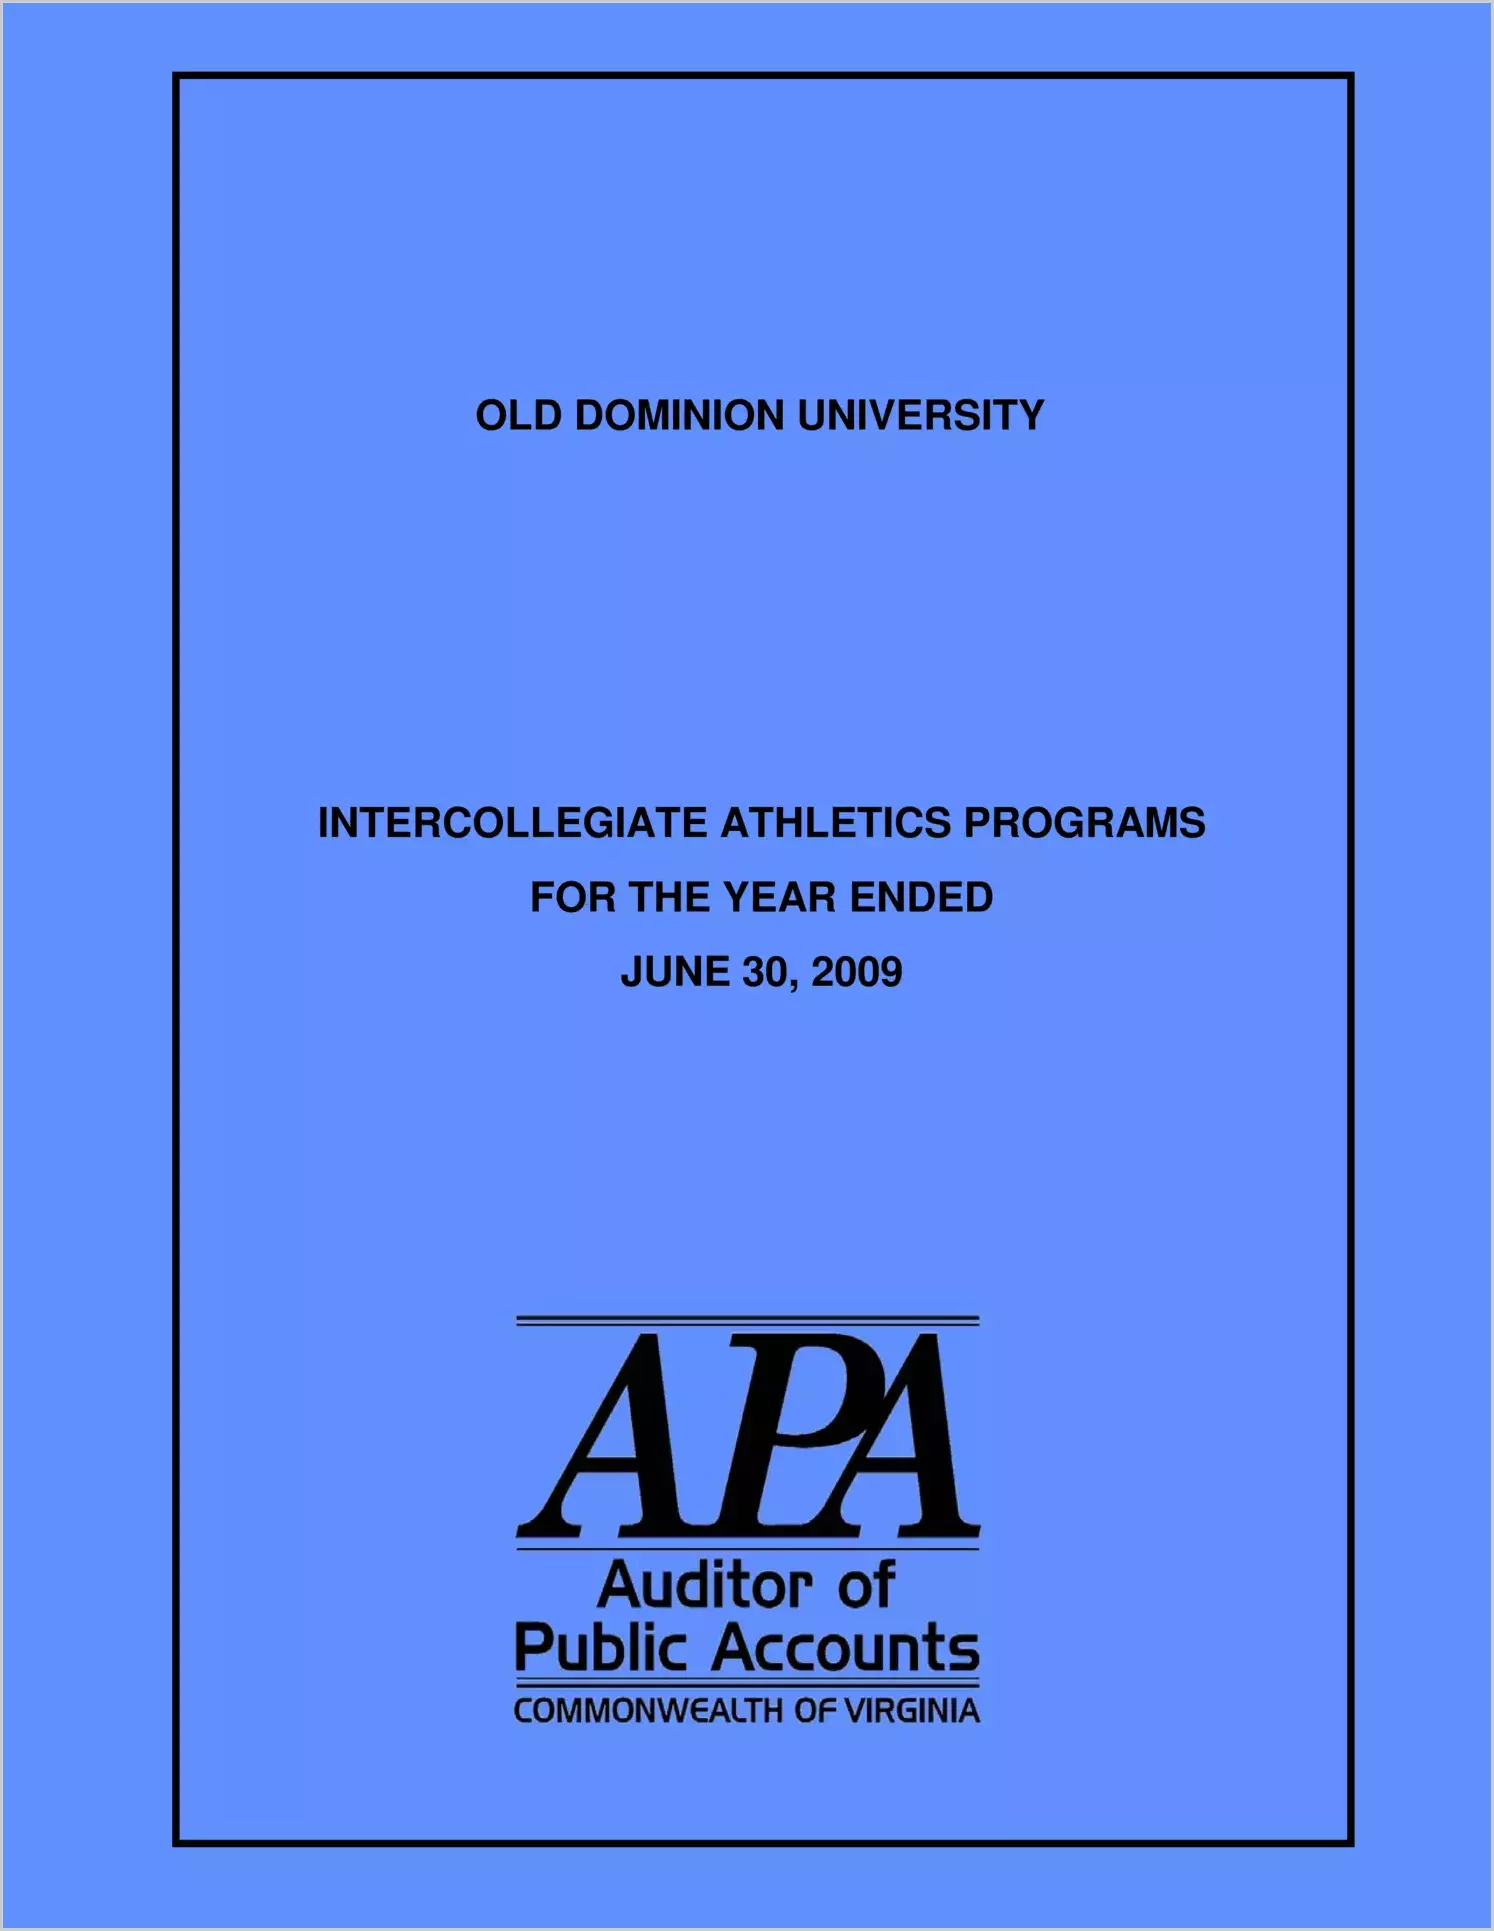 Old Dominion University Intercollegiate Athletic Programs for the year ended June 30, 2009